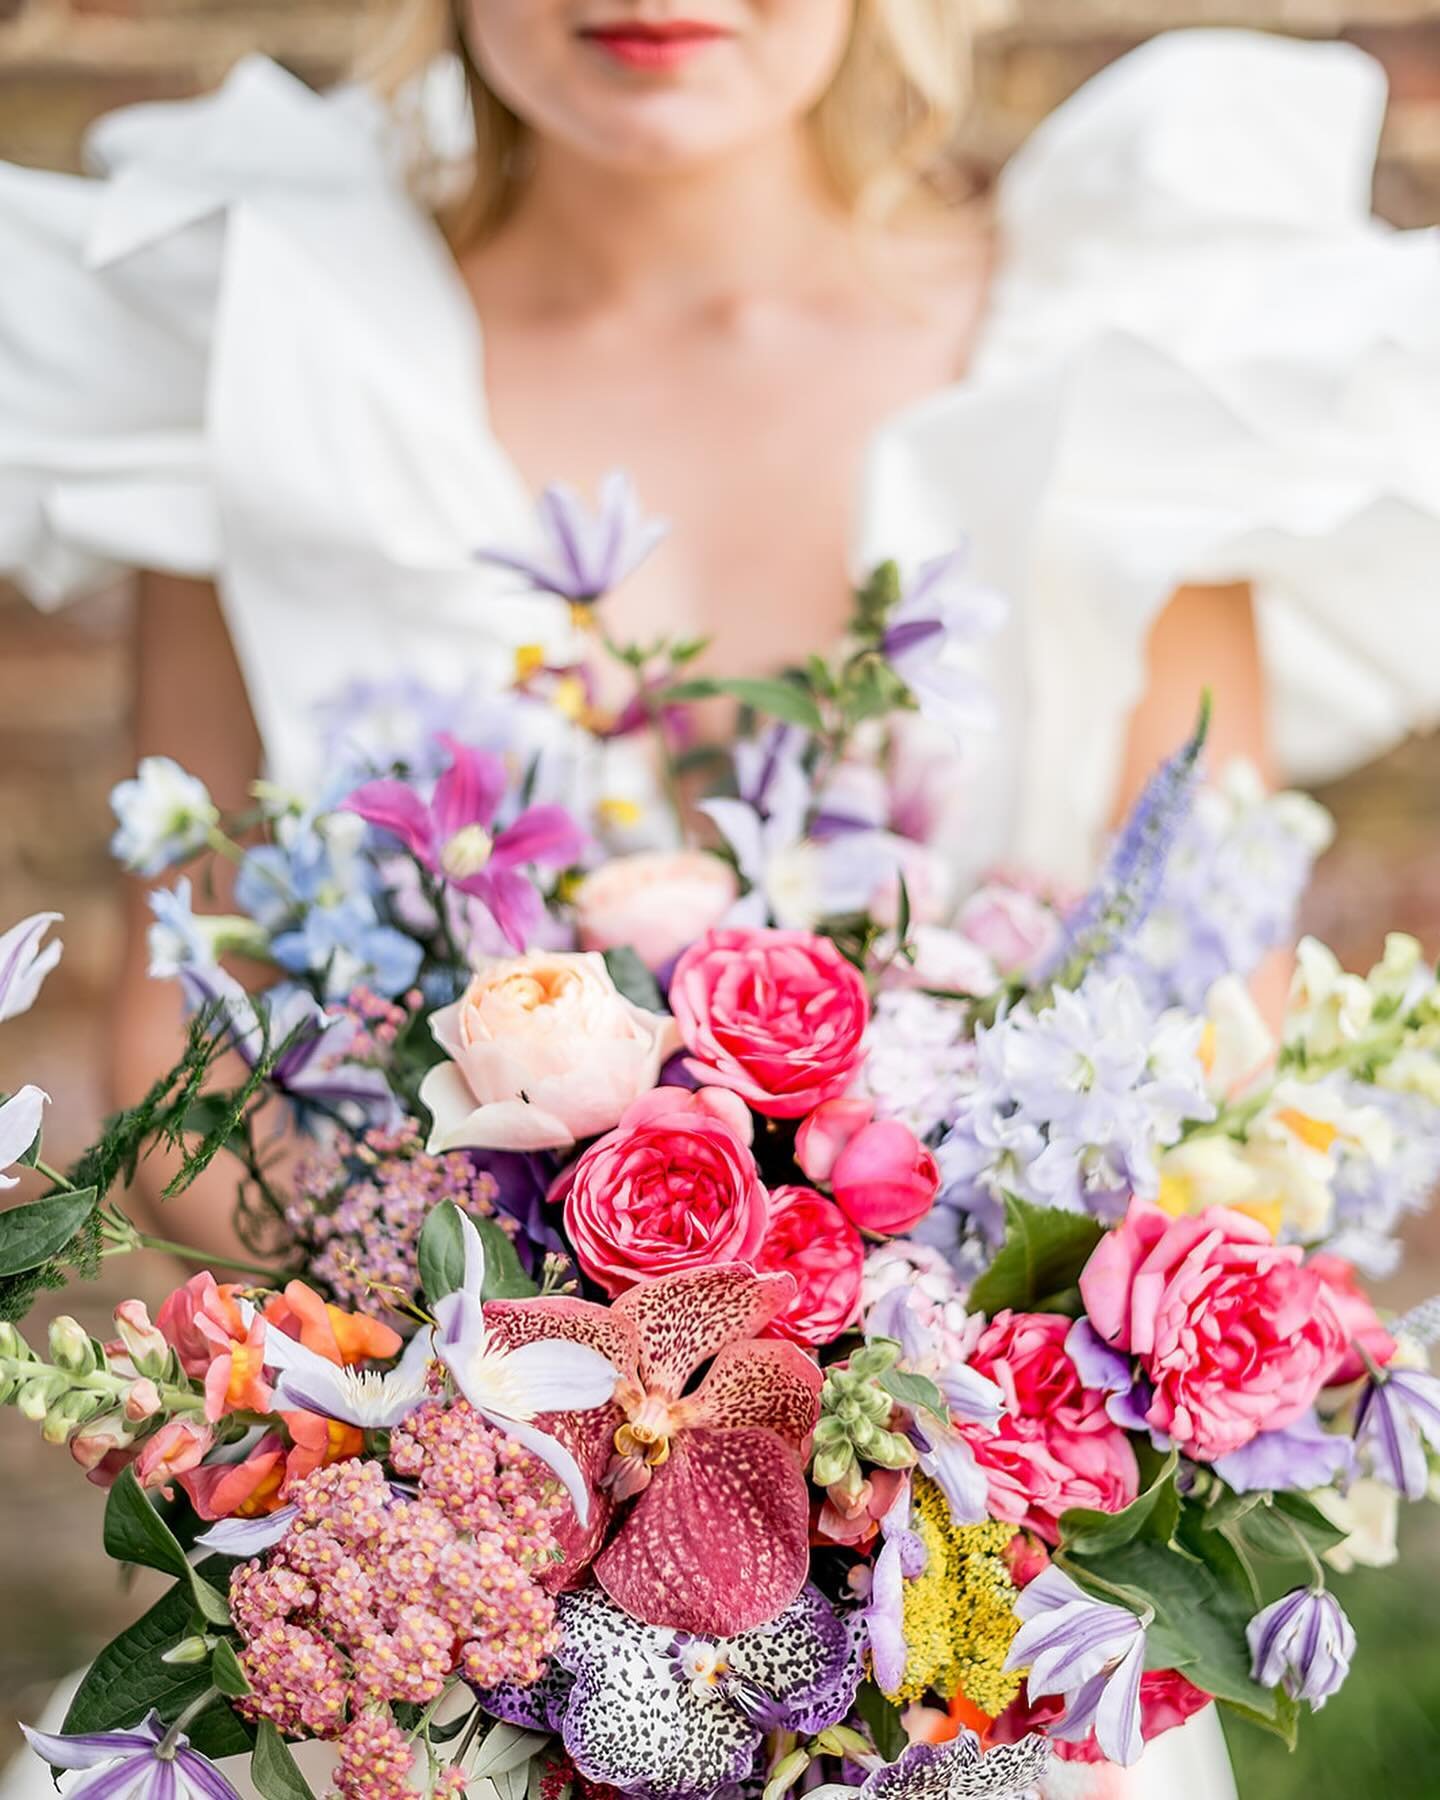 ⭐️ Wedding Edit ⭐️ ready for the wedding season? Want to refresh your skills after a long old winter? Looking to take the next step in your floristry journey? Join us on Tuesday 14th - Friday 17th May at our workshop in Arthington. We will talk all t